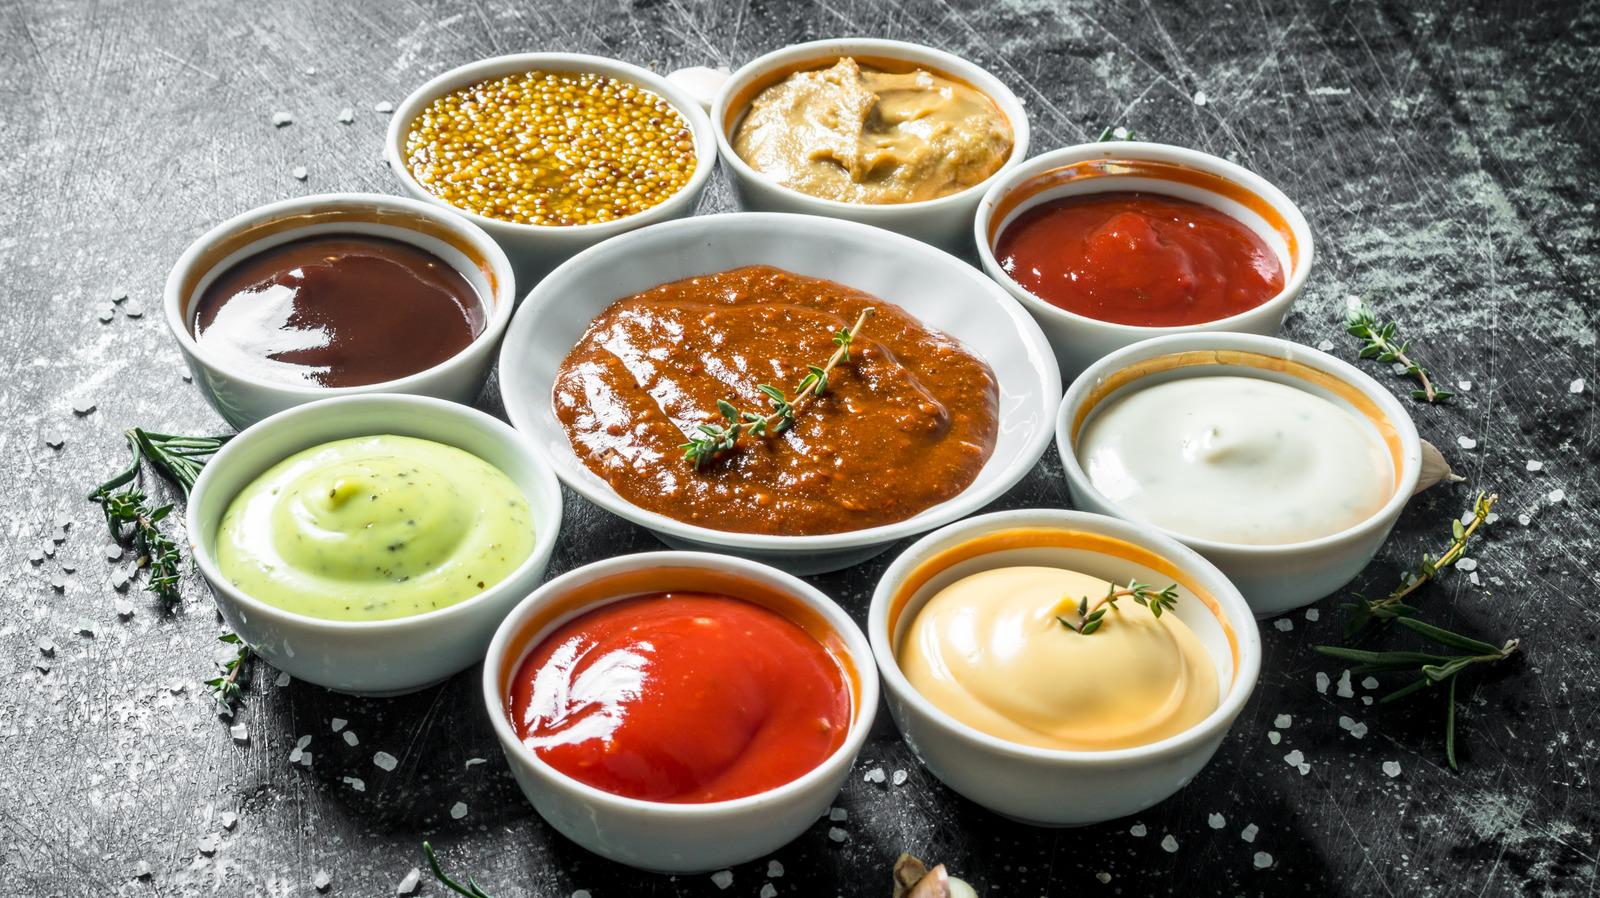 The Sandwich Condiment Preferred By Over 50% Of People Might Surprise You